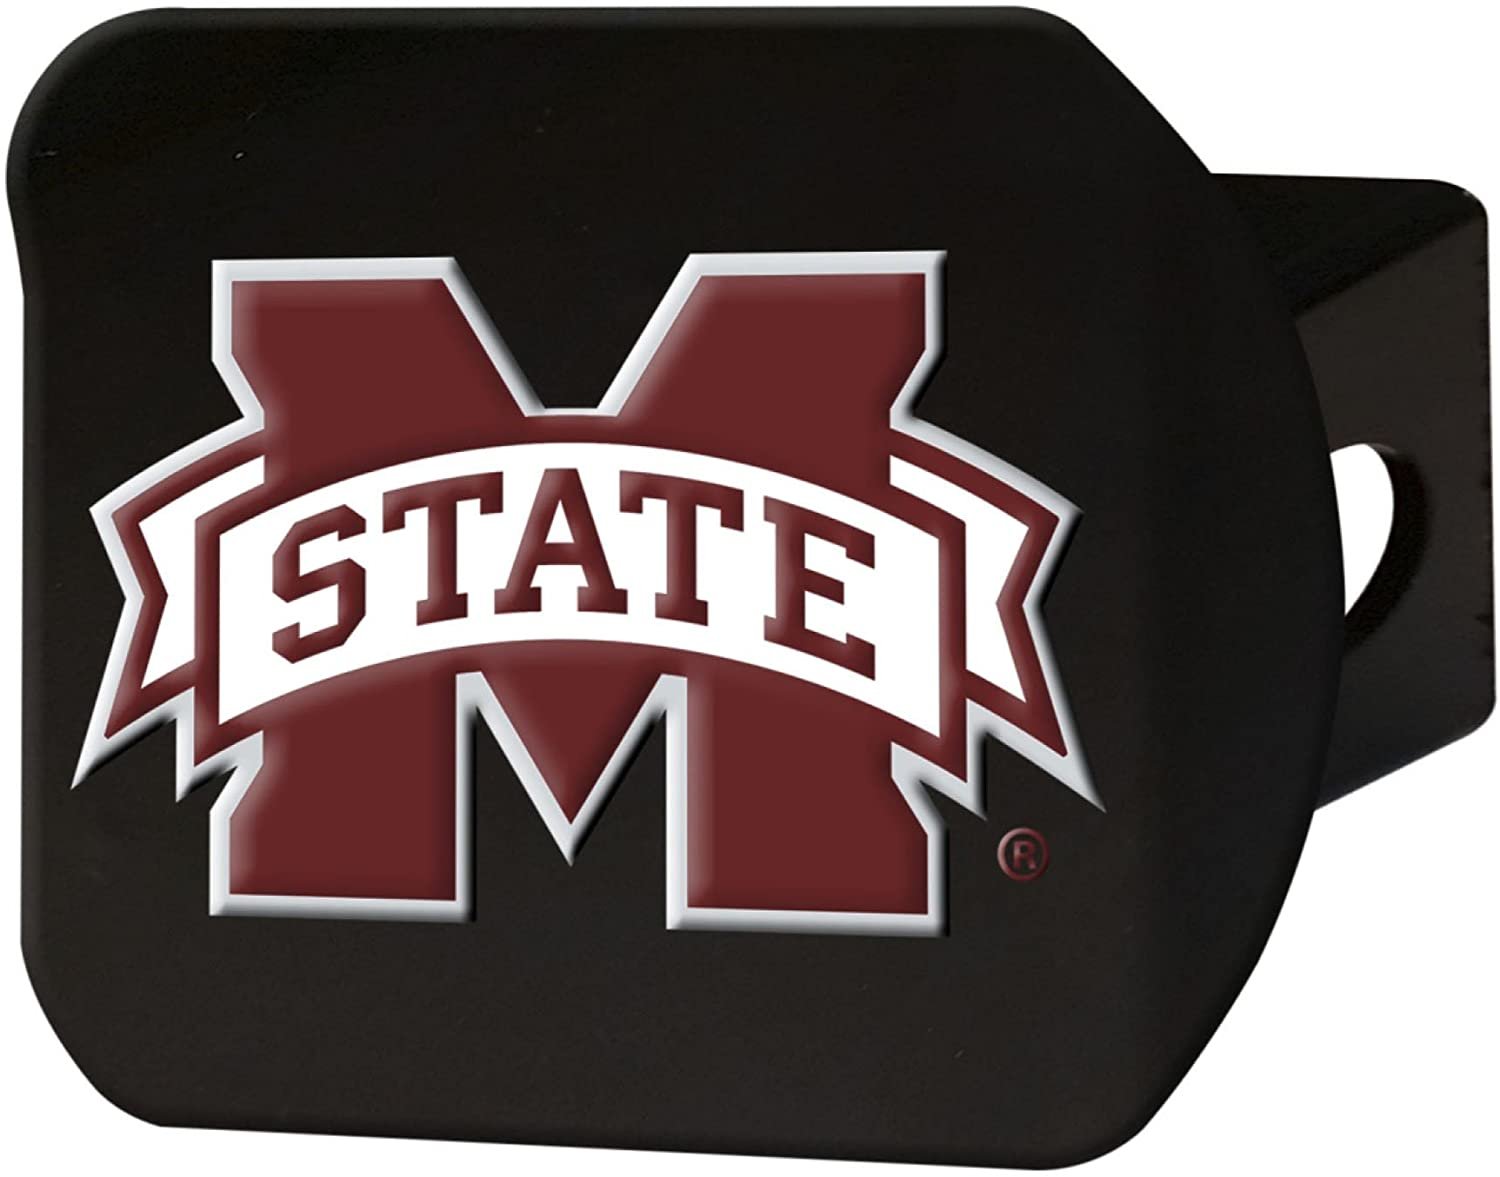 Mississippi State Bulldogs Hitch Cover Black Solid Metal with Raised Color Metal Emblem 2" Square Type III University